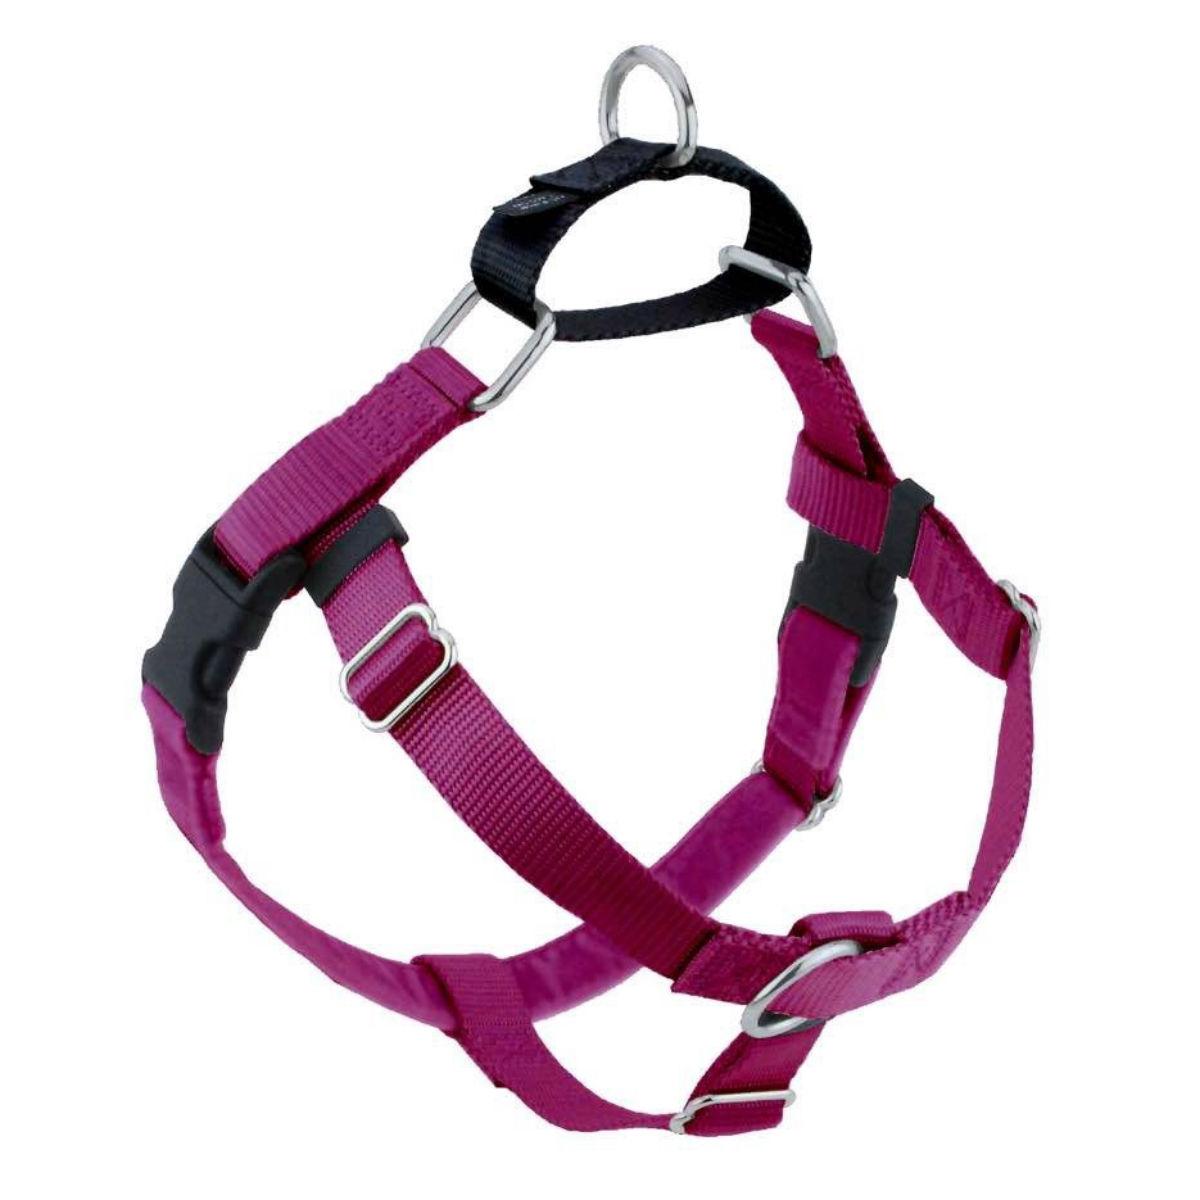 2 Hounds Design No-Pull Dog Harness Deluxe Training Package - Raspberry and Black